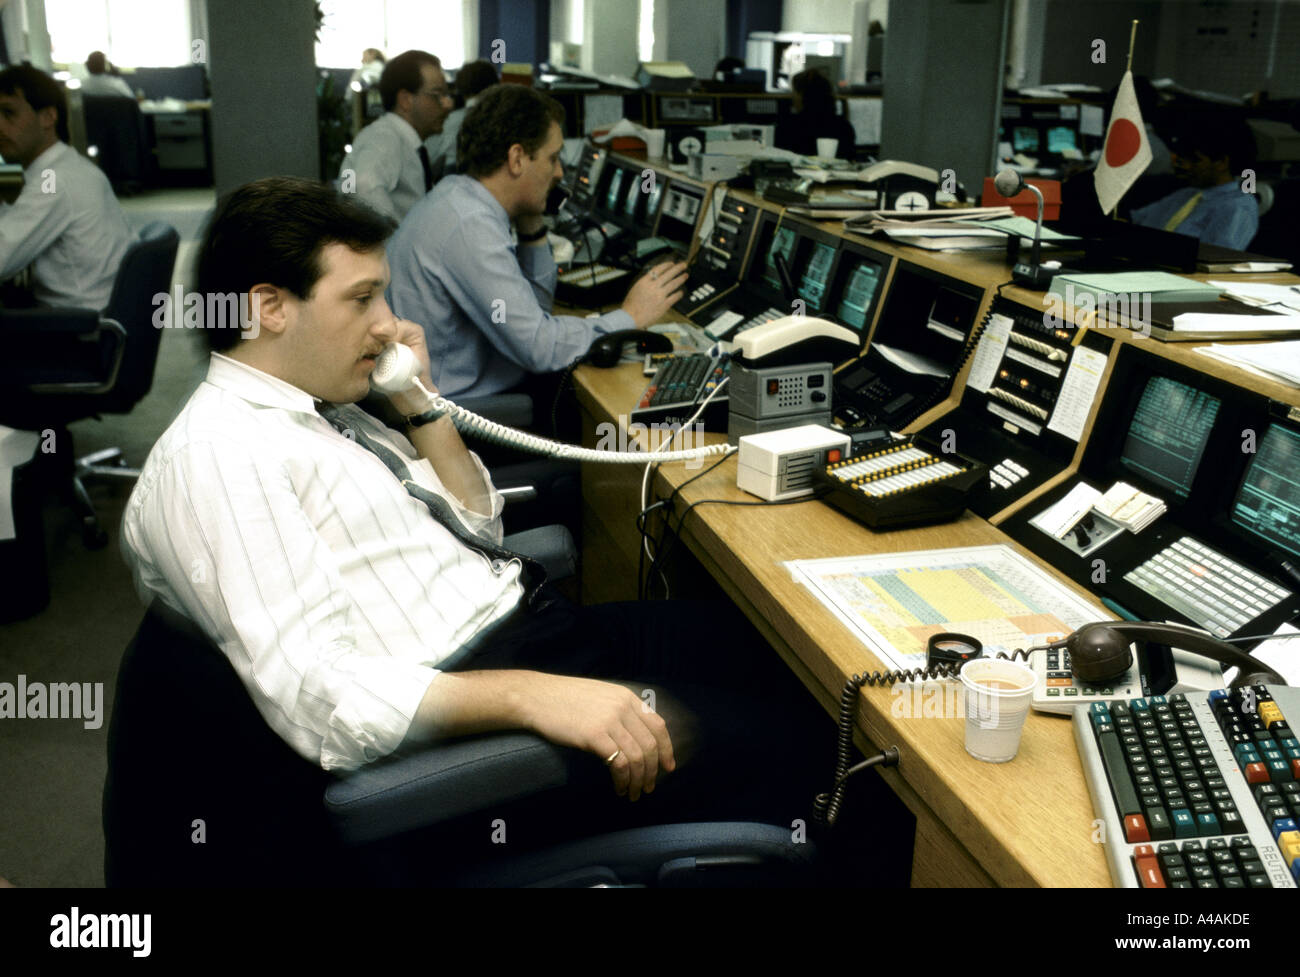 trader on the phone at work city of london soon after Big Bang in 1986 Stock Photo